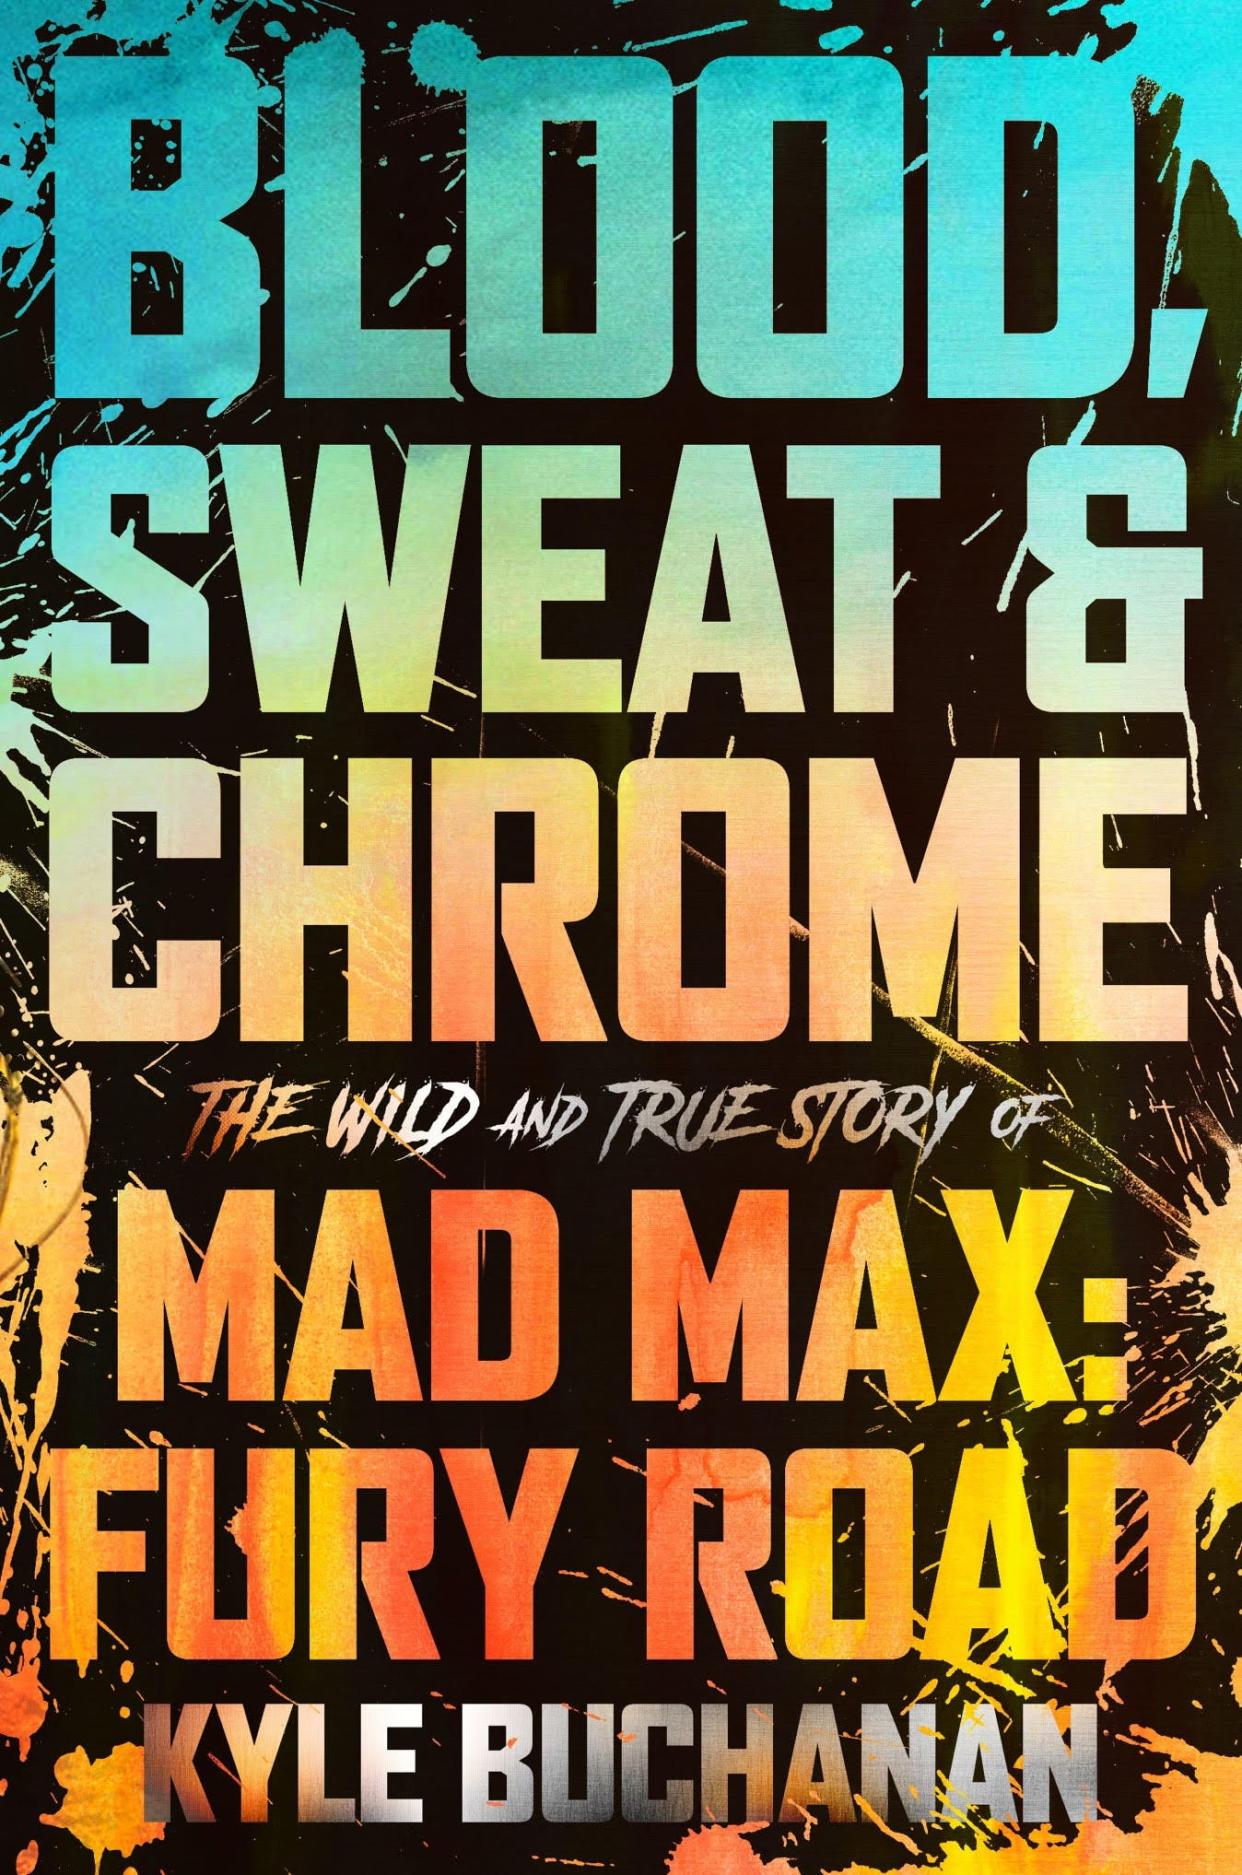 Cover art for Kyle Buchanan's book "Blood, Sweat & Chrome: The Wild and True Story of Mad Max: Fury Road"